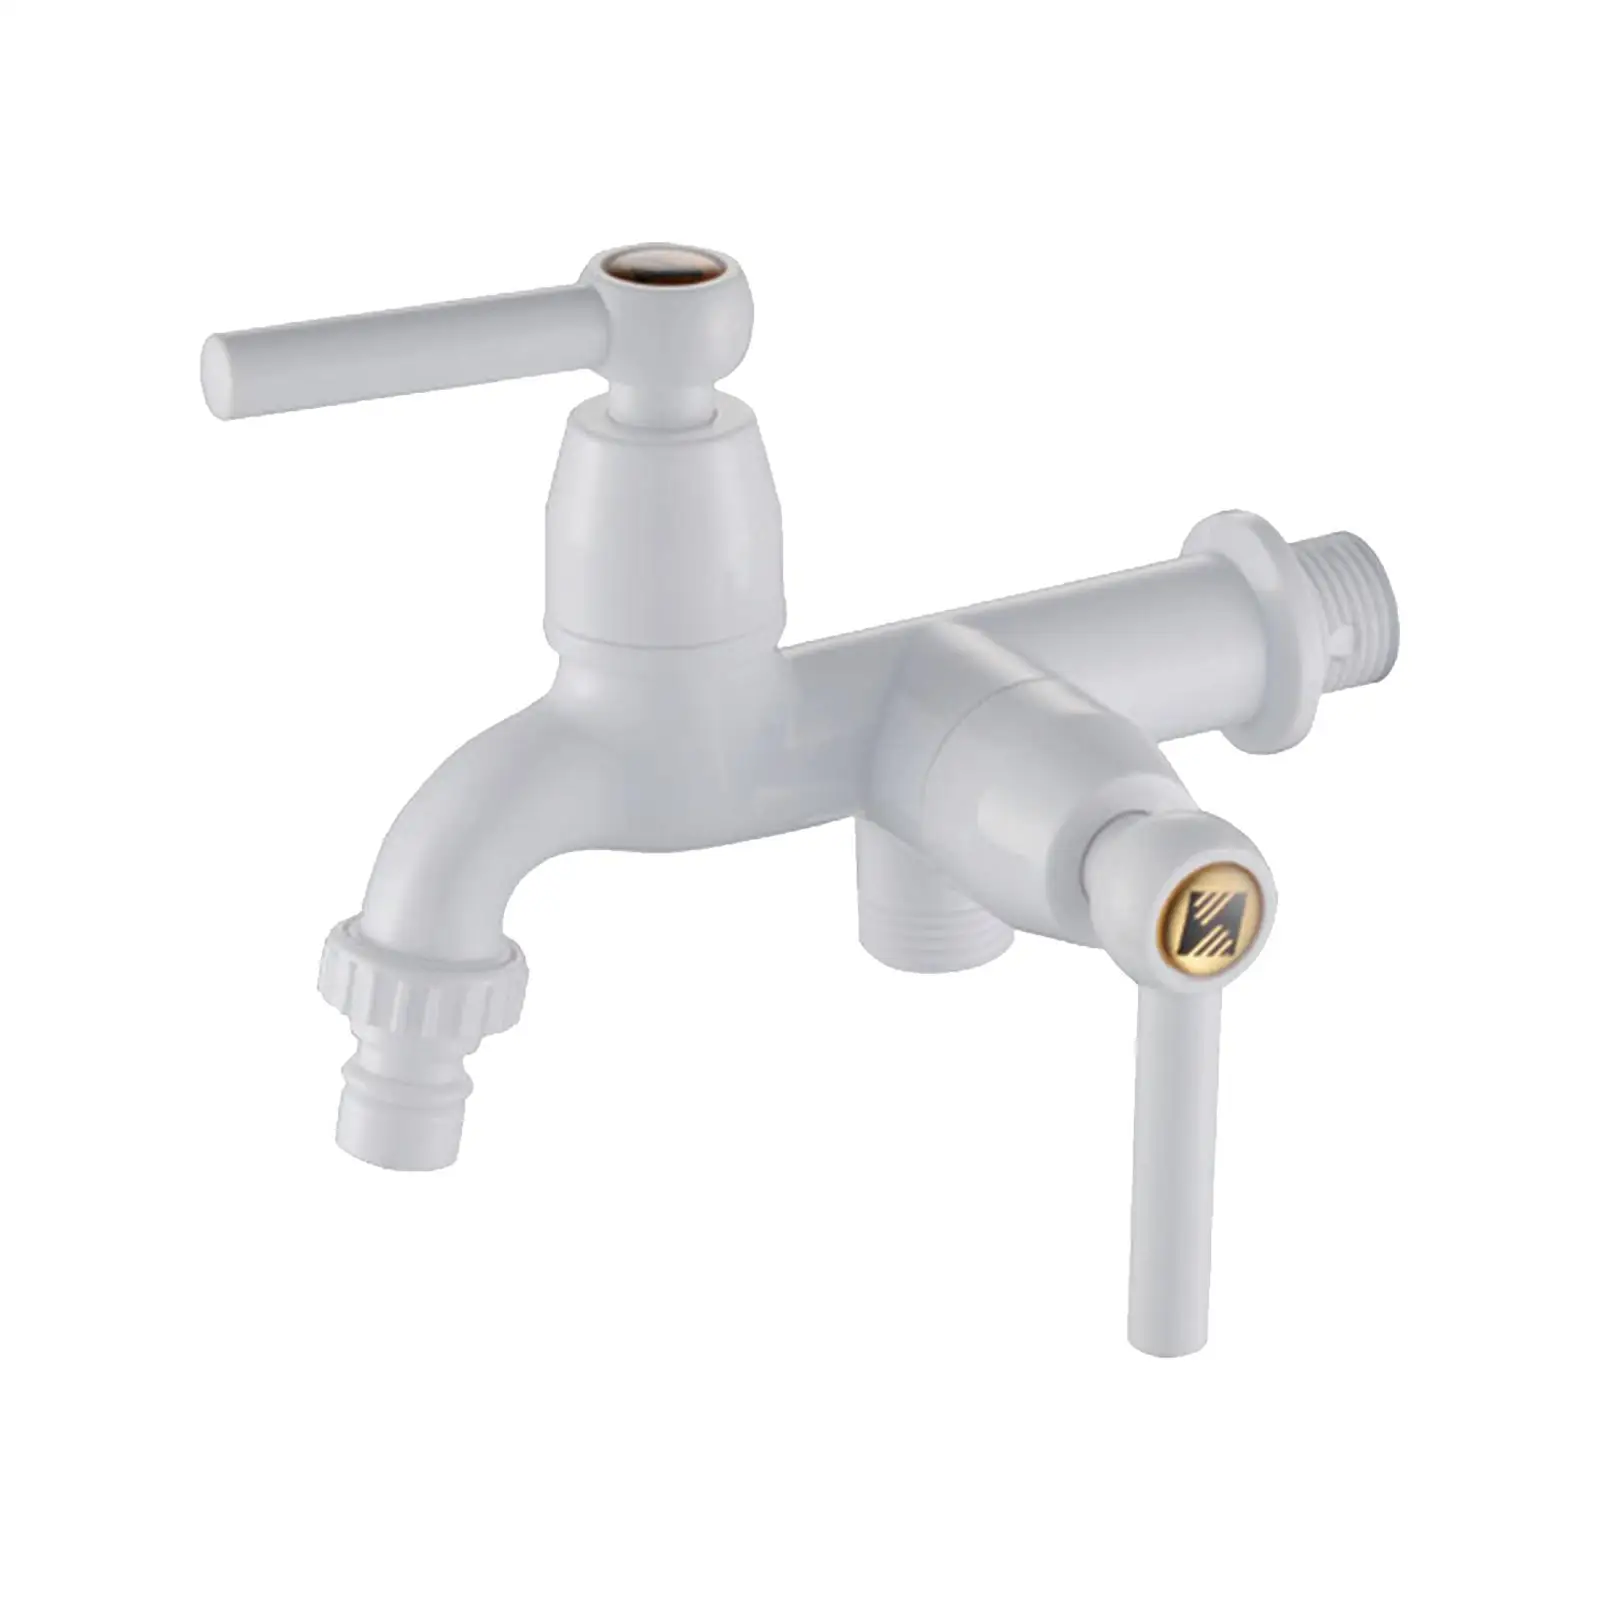 Washing Machine Faucet G1/2 Thread Wall Mounted Tap for Home Outdoor Indoor